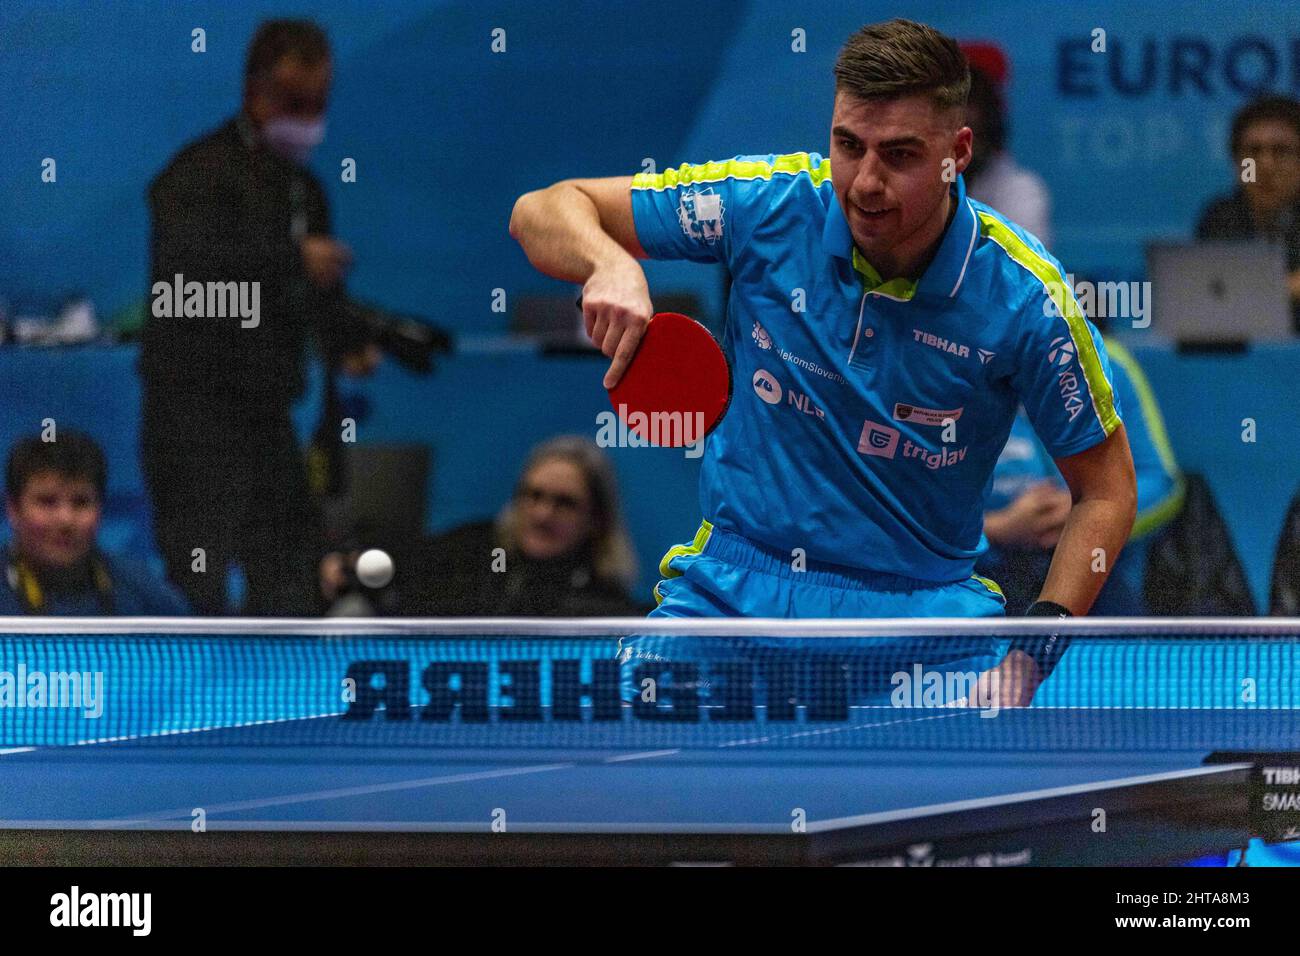 Montreux, Pierrier Sports Hall, Switzerland. 27th Feb, 2022. Montreux  Switzerland, 02/28/2022: Darko Jorgic of Slovenia is in action during the  final of the men's table tennis tournament at the CCB Europe Top